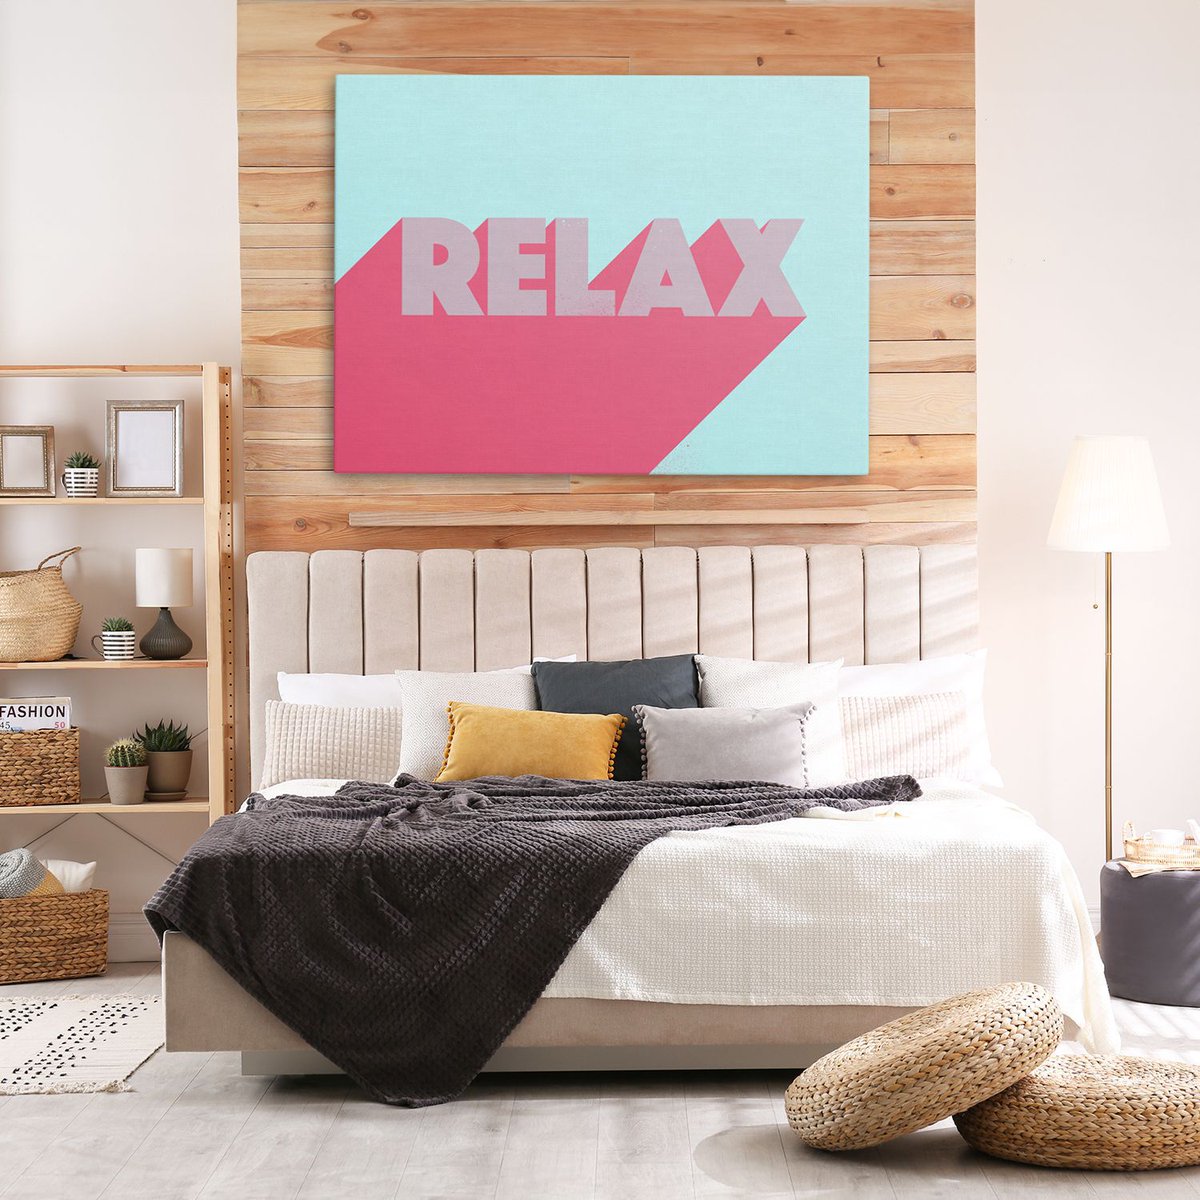 This is your beginning of the week reminder to make your home a mood board for serenity. 😊🎨
.
.
.
#typography #graphicdesign #art #artist #artwork #signart #font #design #painting #paintings #typographicposter #wallart #canvaspainting #canvasart #modernart #digitalart